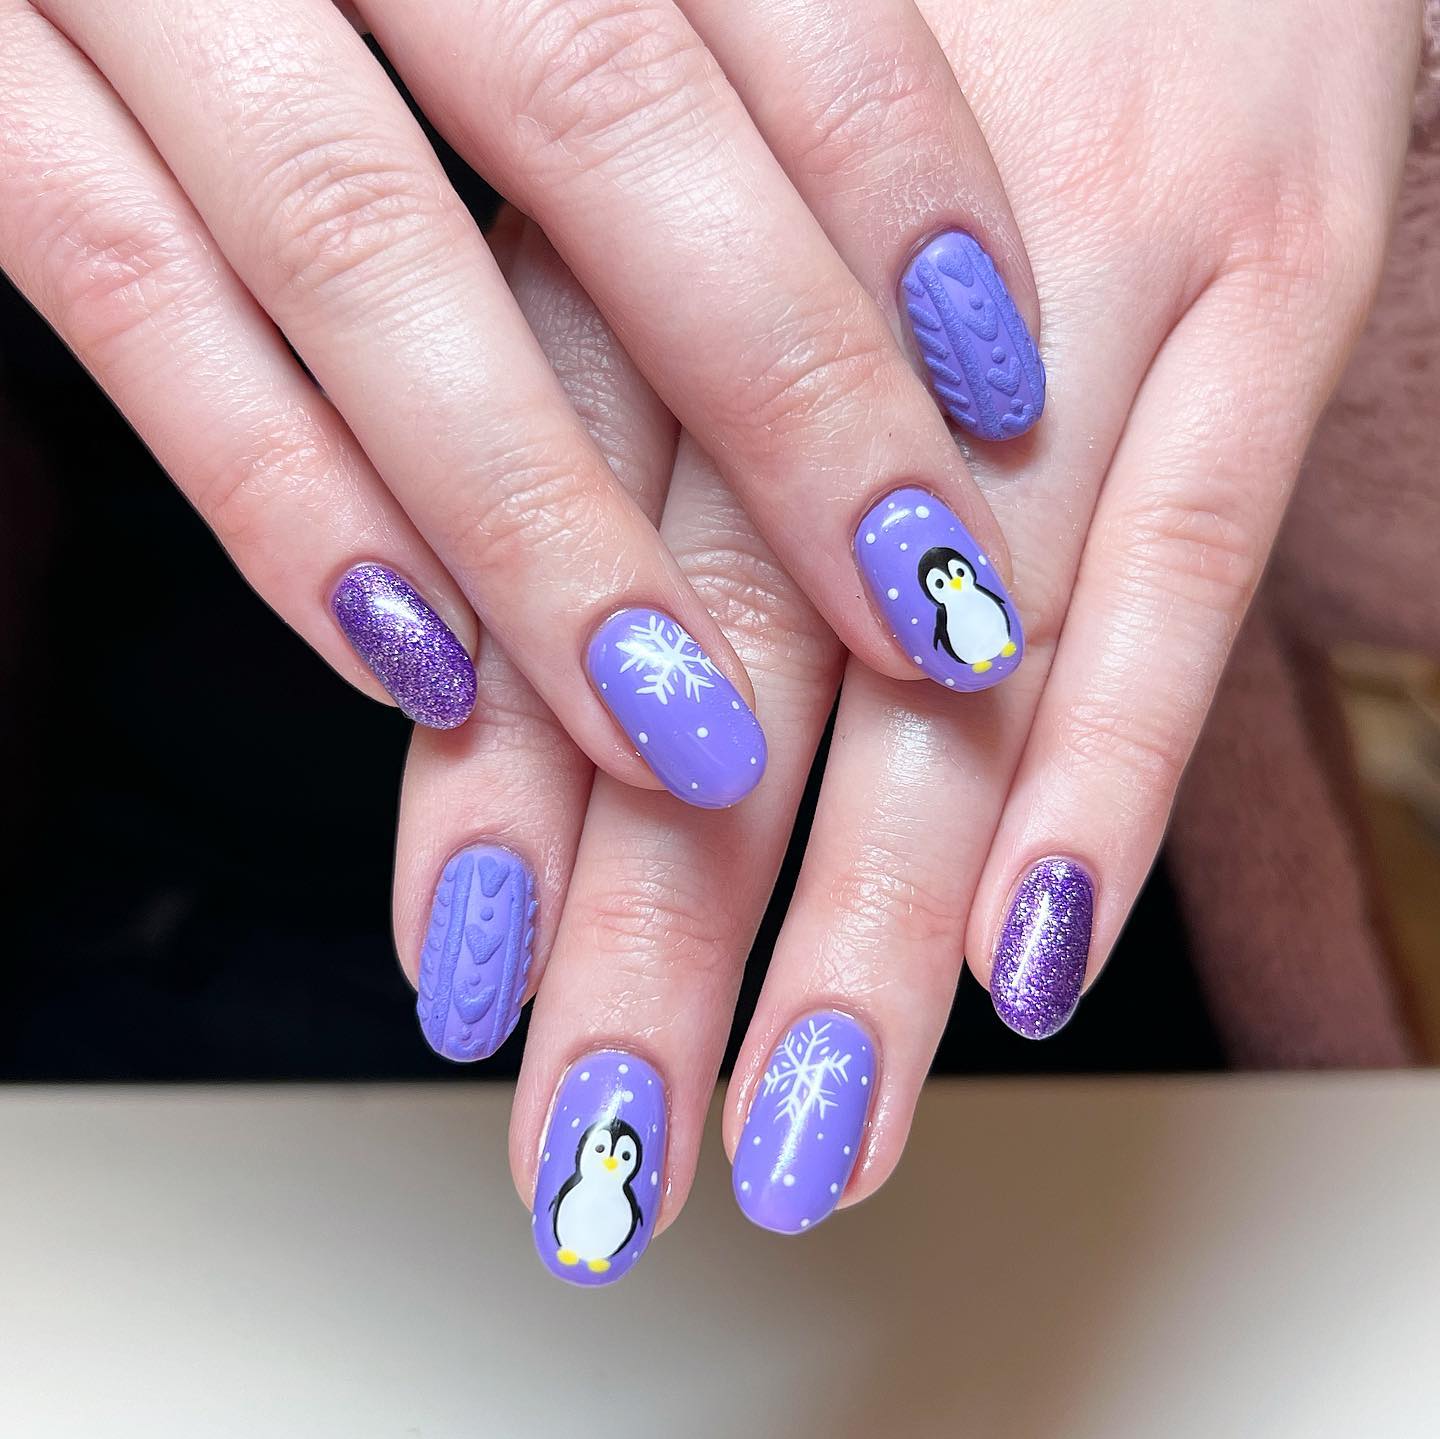 Here is one of the cutest nail arts. For your purple nails, you can have different nail designs for each of your finger.